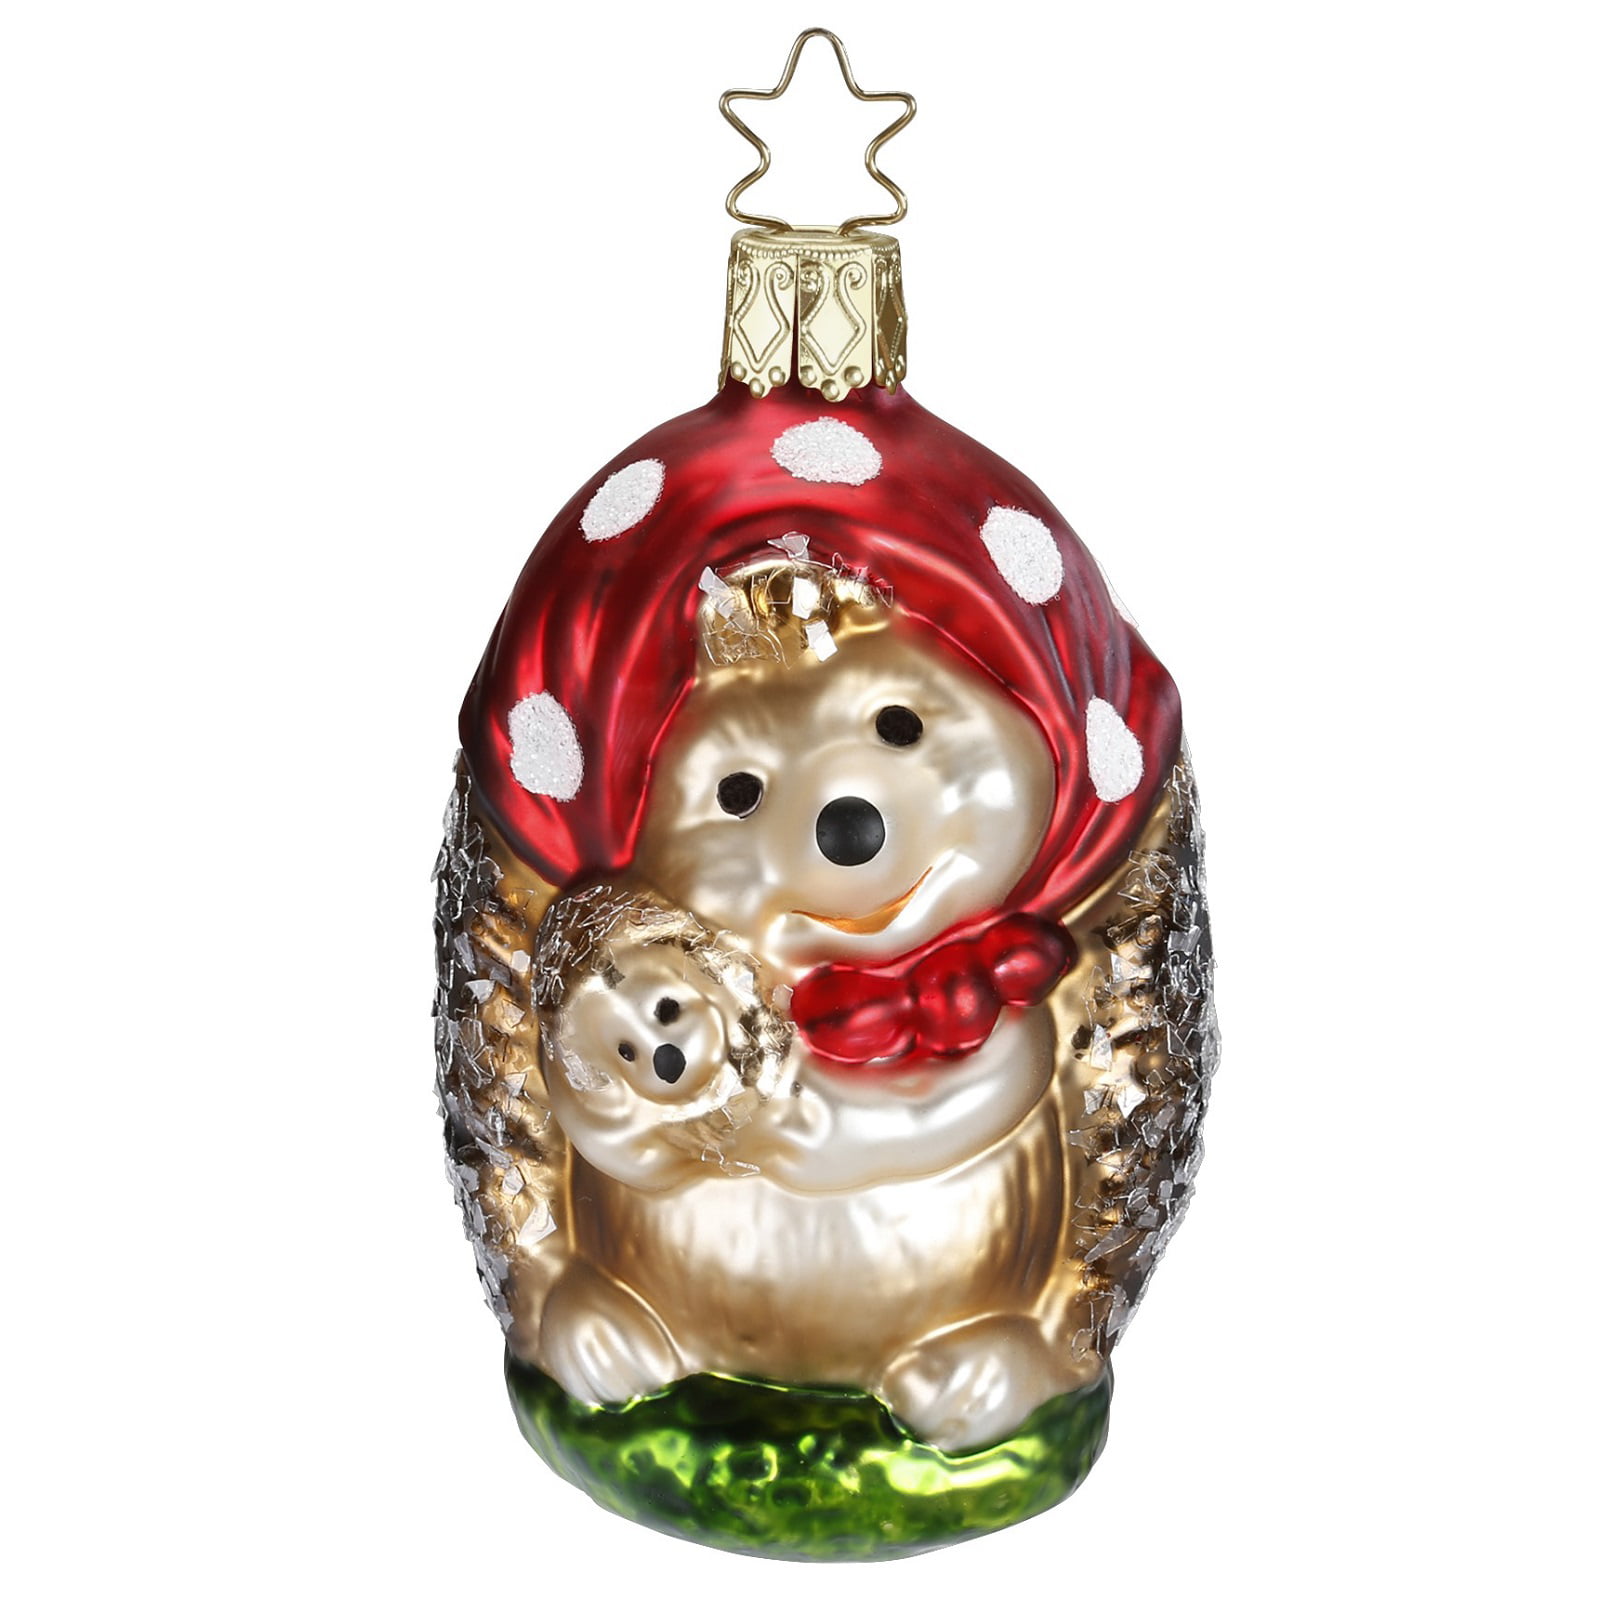 Inge's Christmas Heirlooms  Pink Heart Cookie  Glass Christmas Ornament  Germany 